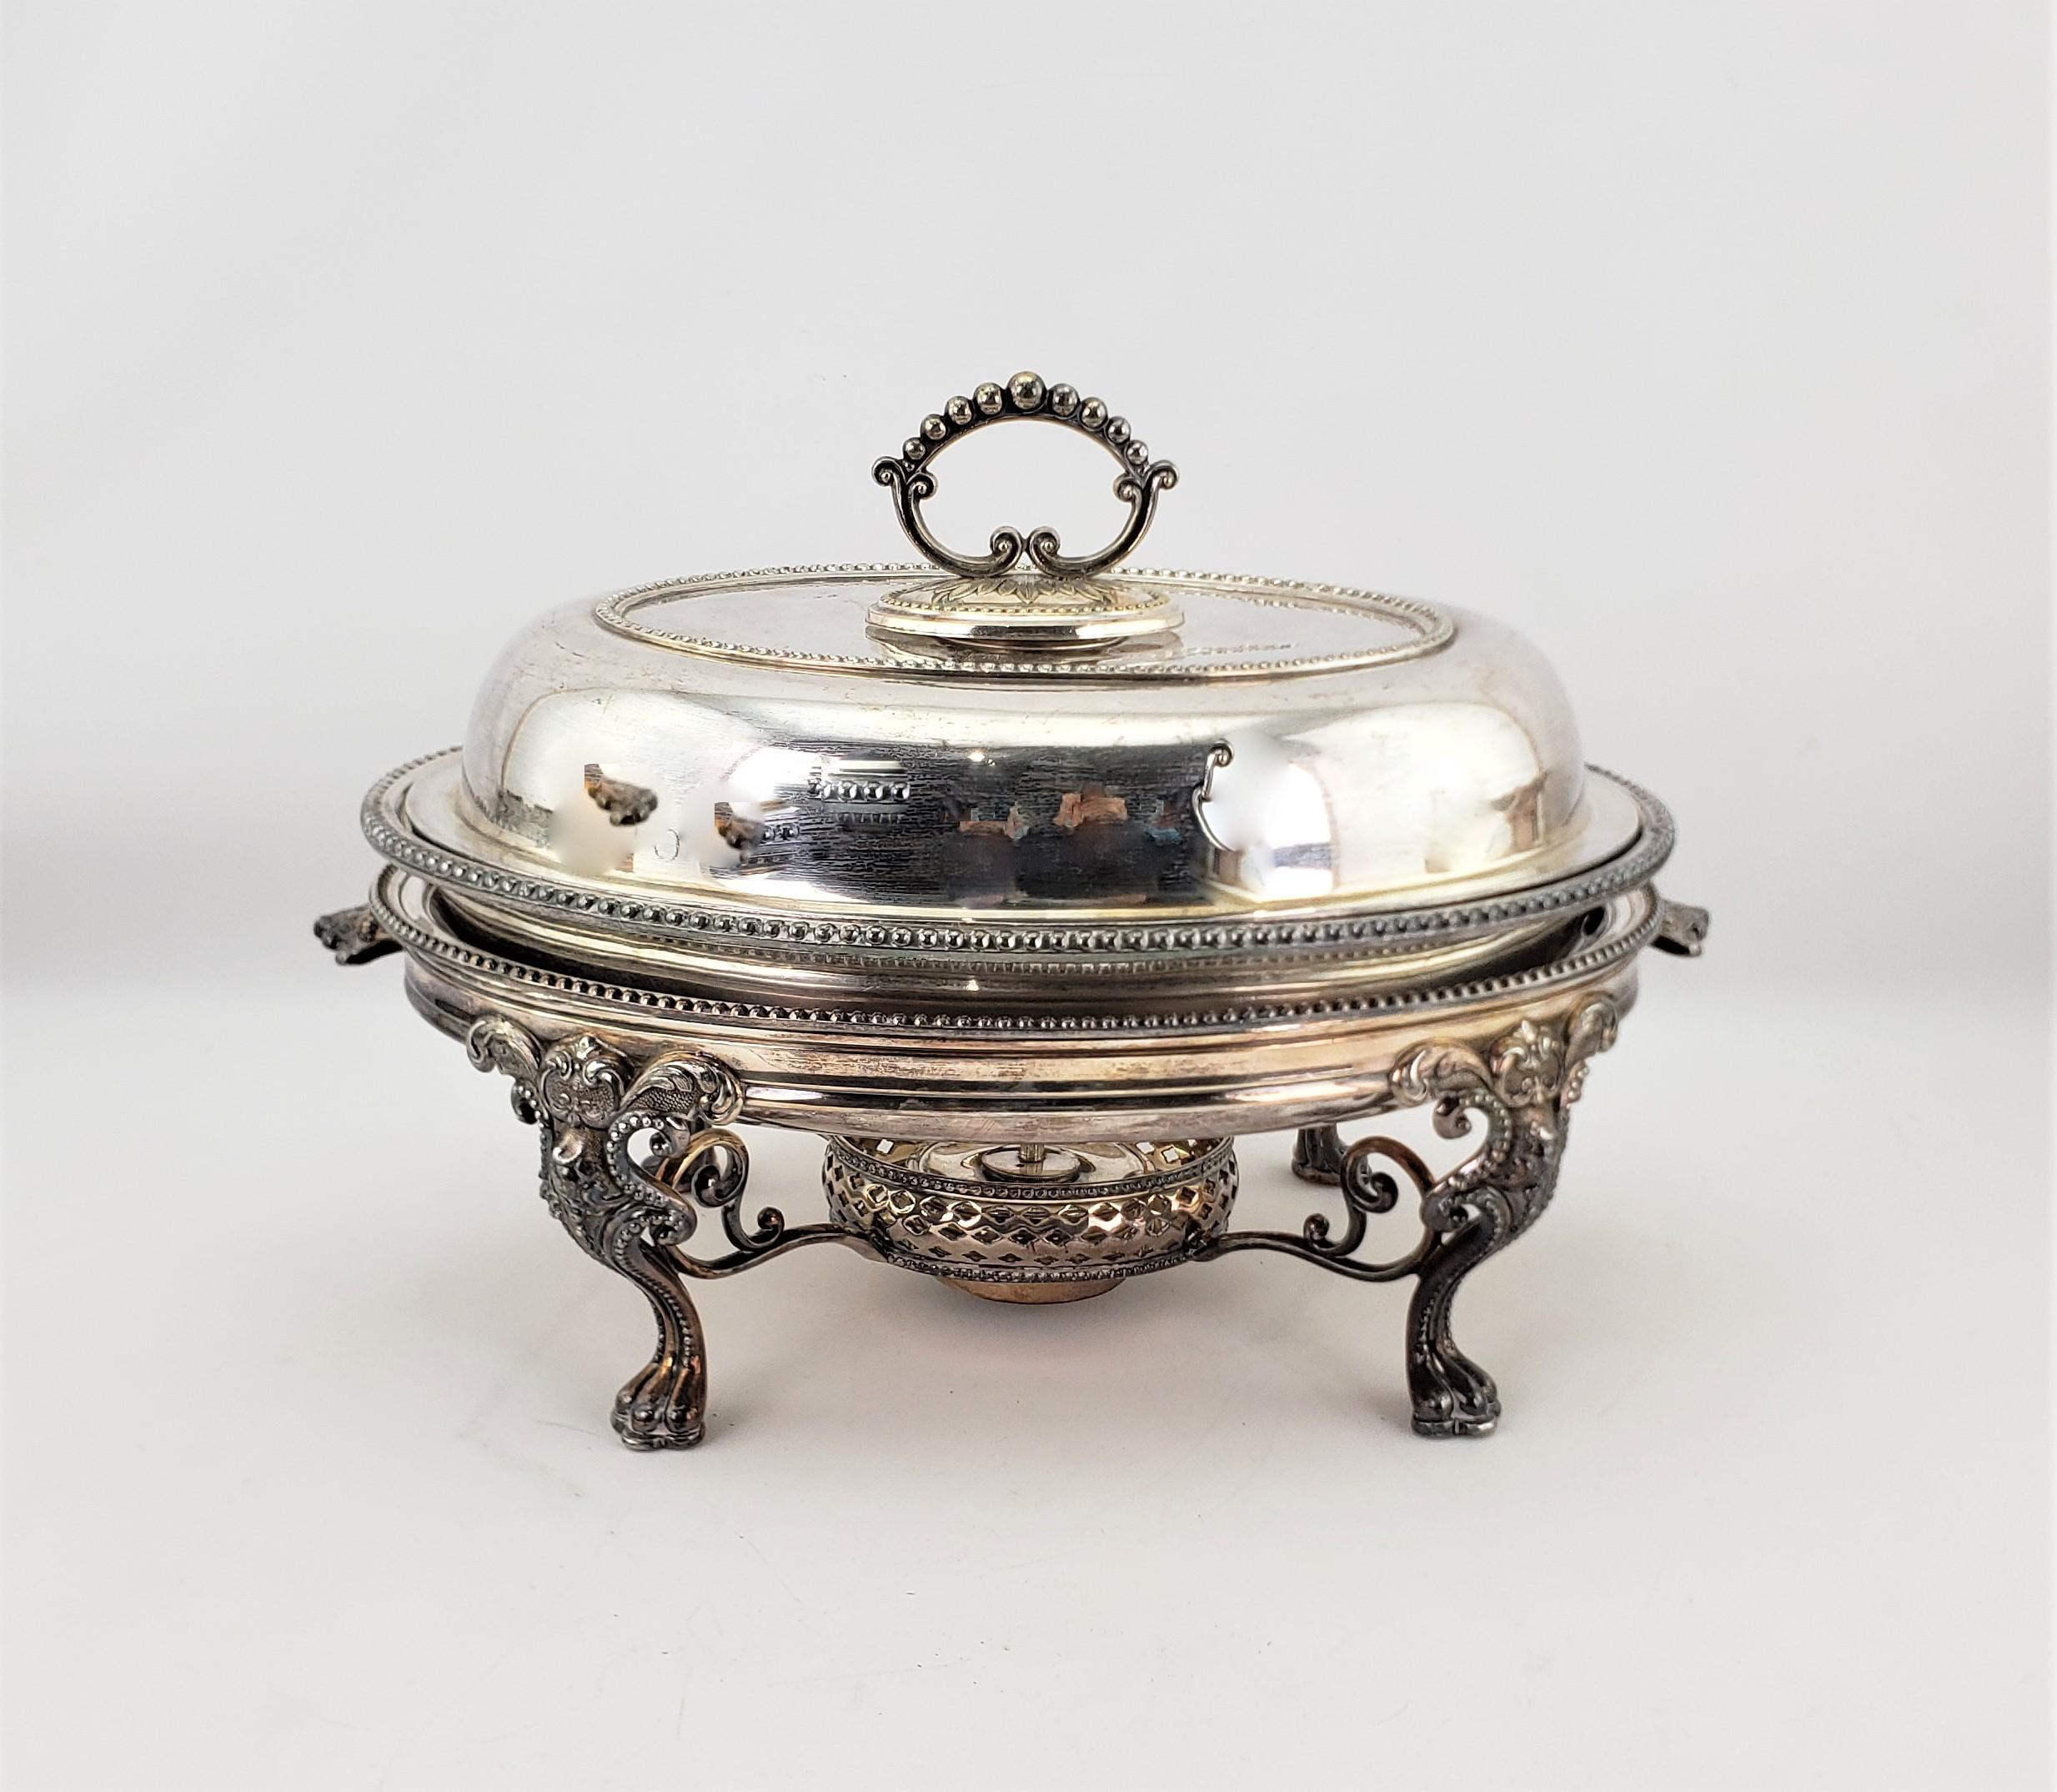 This antique silver plated warm food server was made by the well known Reed & Barton of the United States in approximately 1920 in an Edwardian style. The oval server or chafing dish has a graduated lid with stylized rope borders which are accented